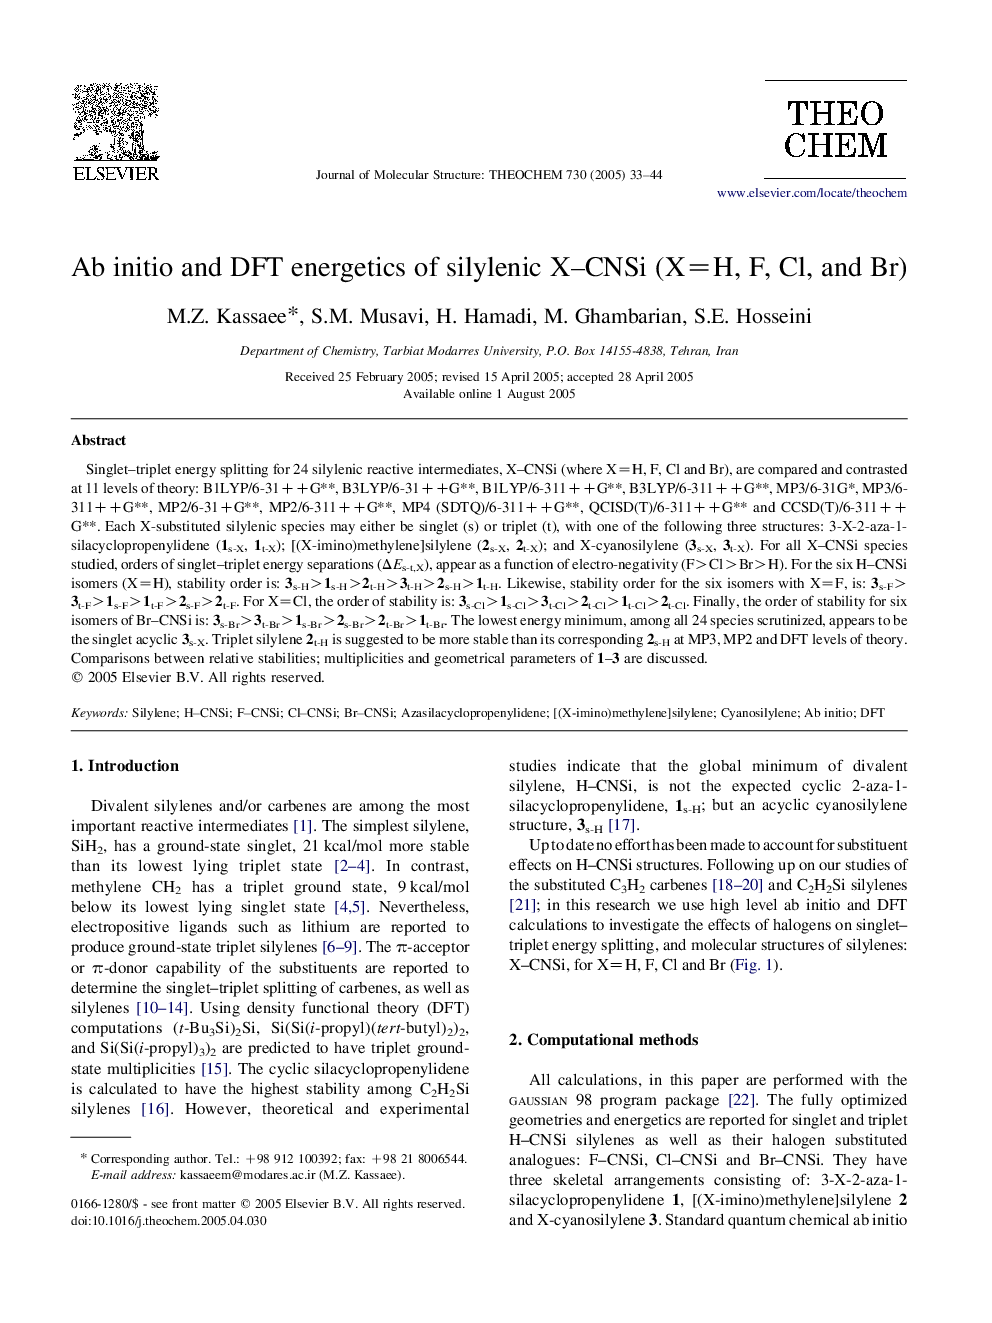 Ab initio and DFT energetics of silylenic X-CNSi (X=H, F, Cl, and Br)